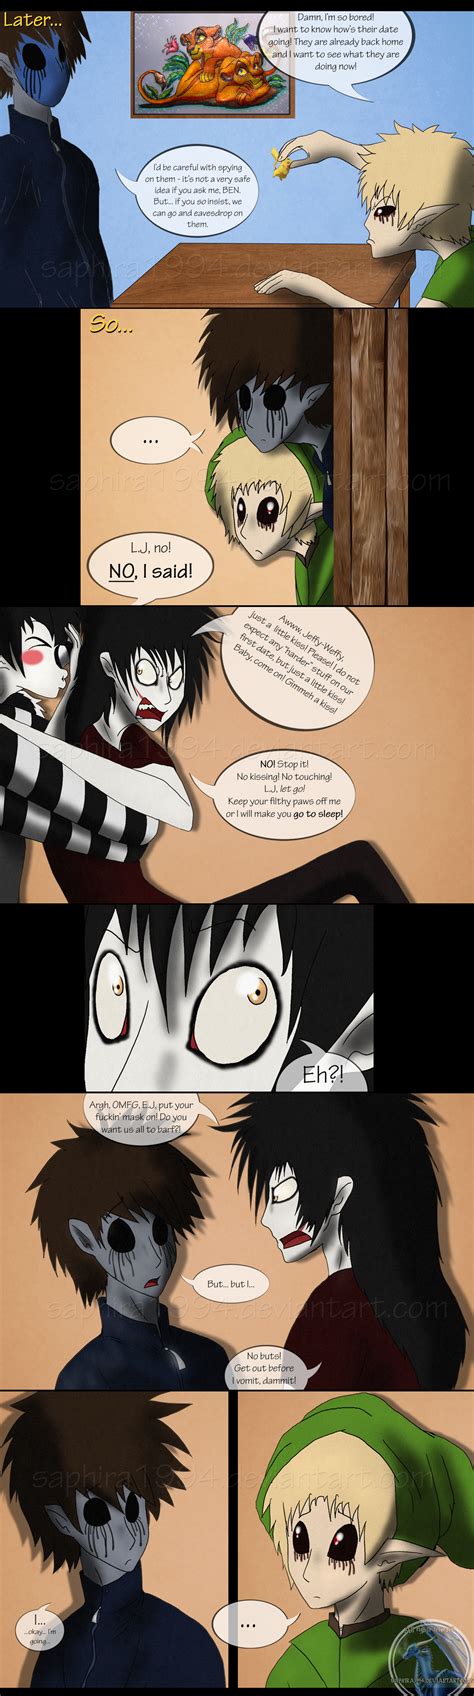 Adventures With Jeff The Killer Page 42 By Sapphiresenthiss On Deviantart